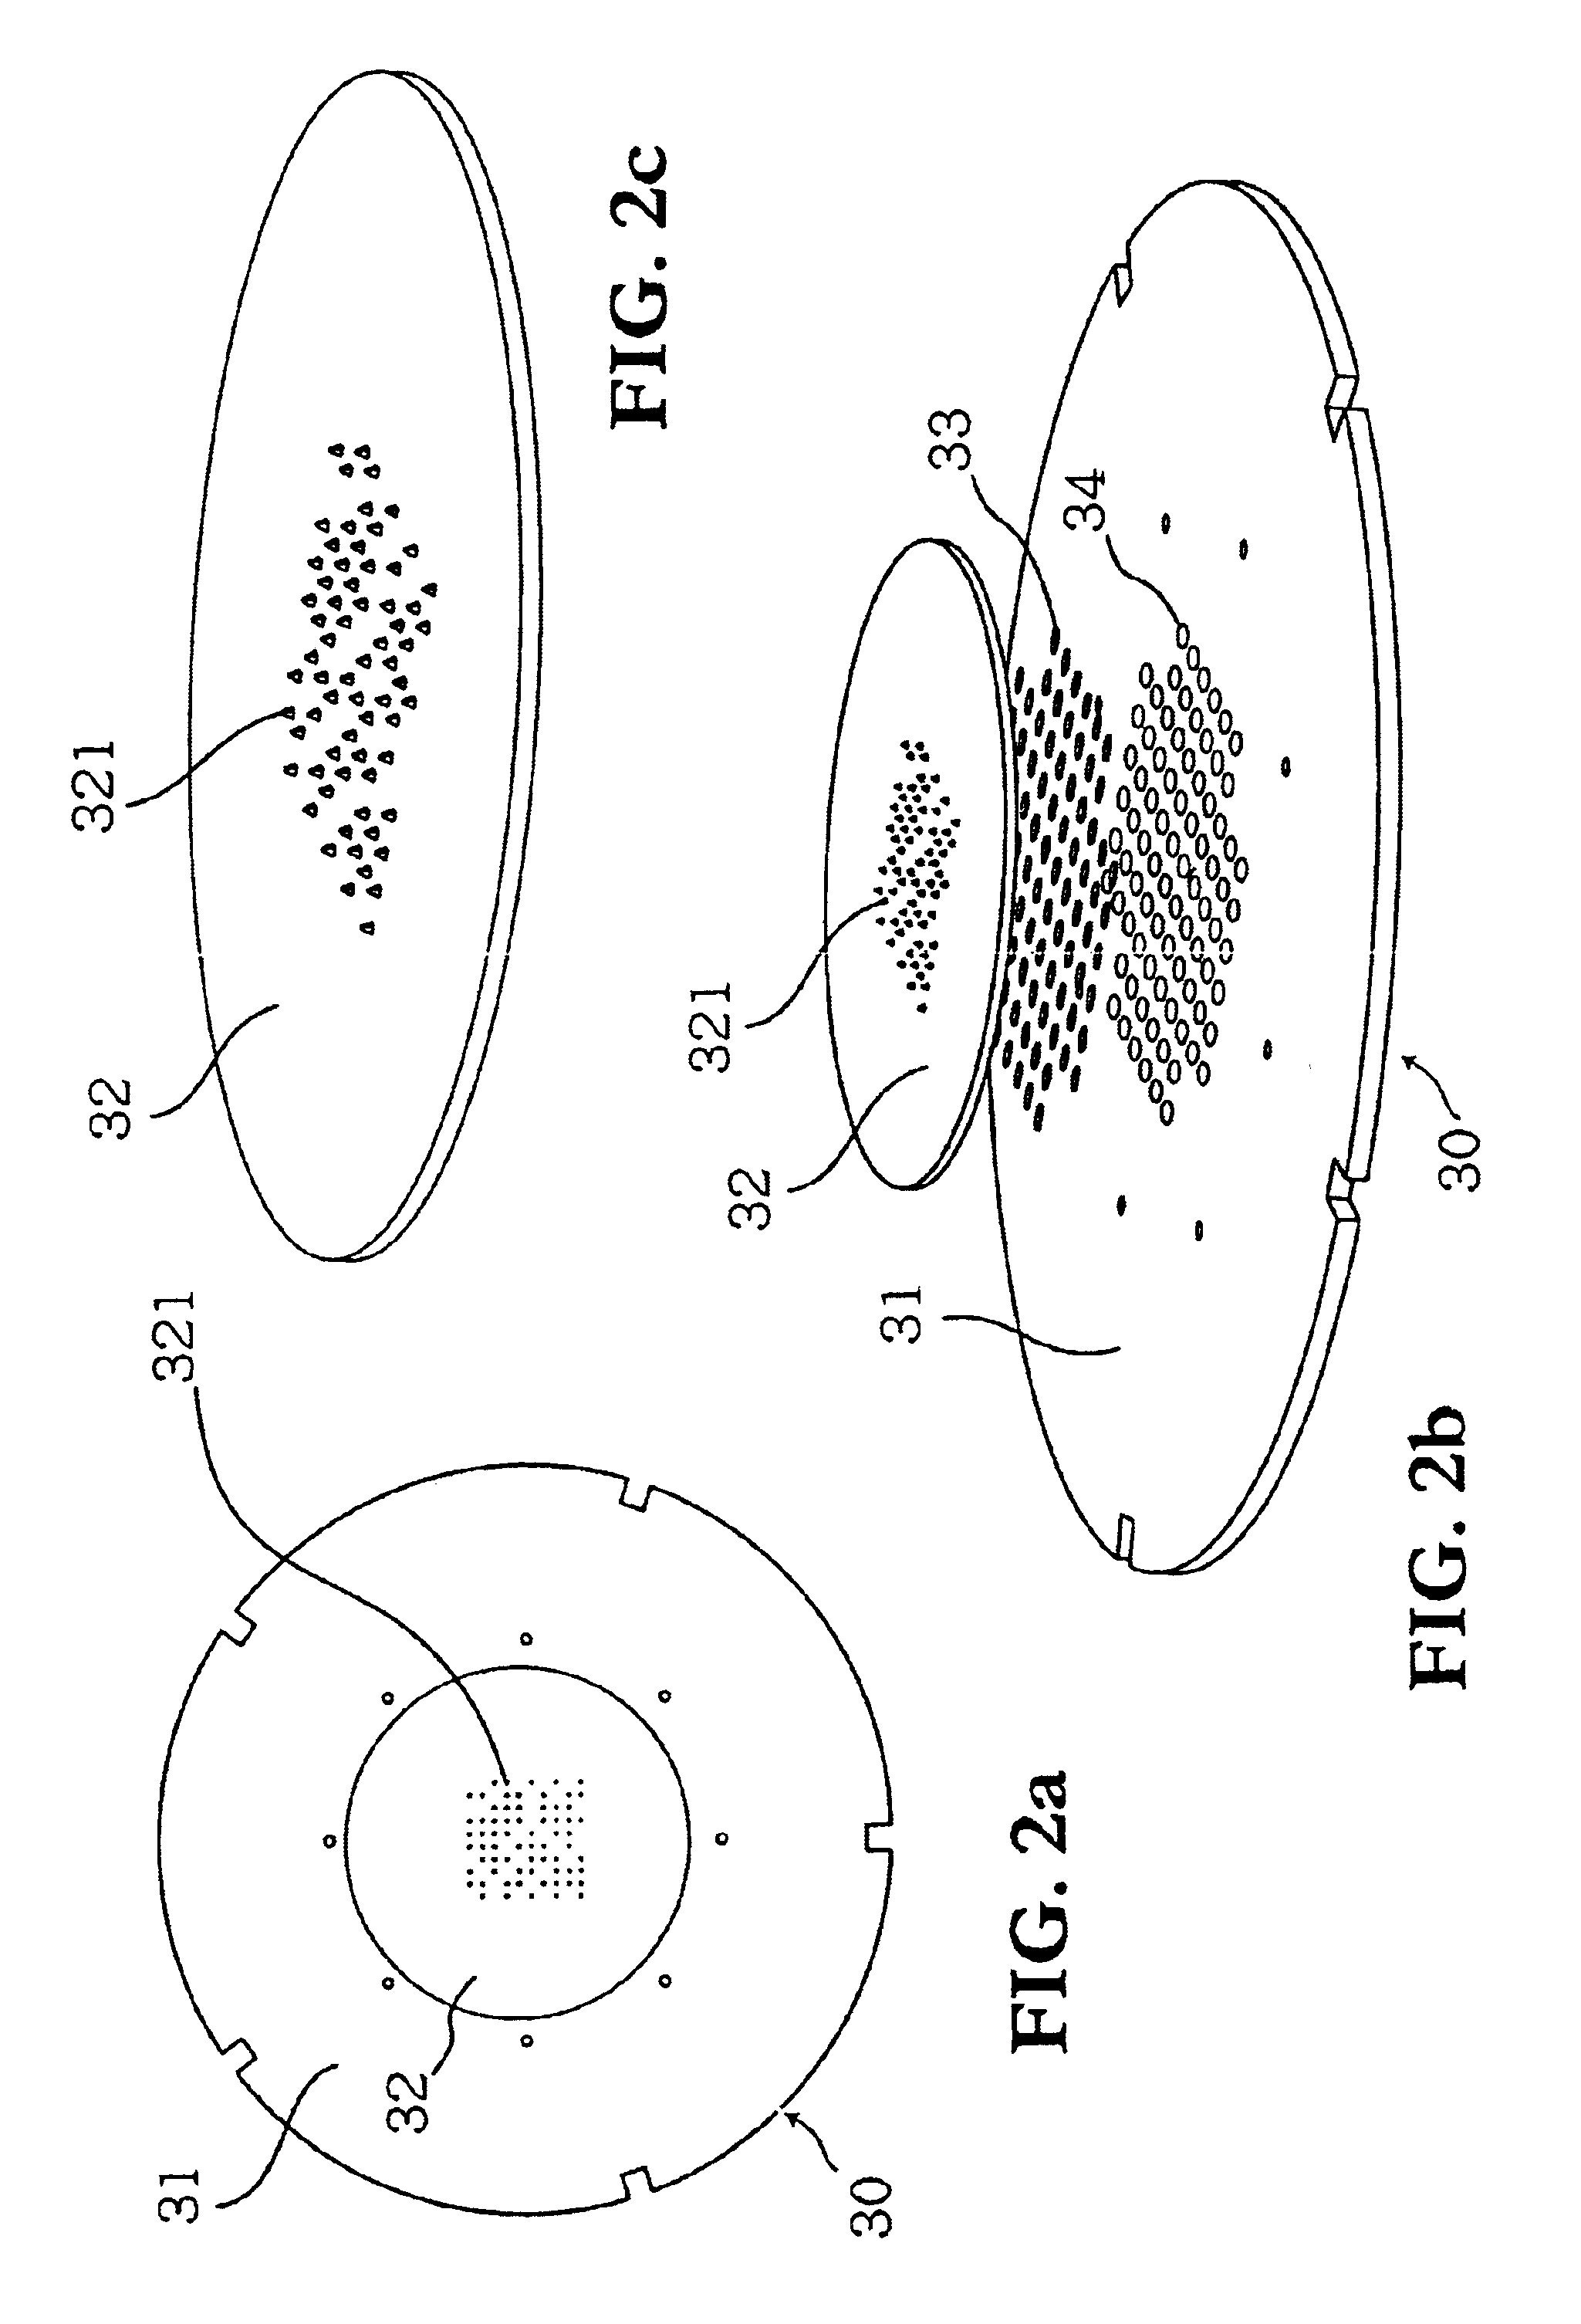 Vertical probe card and method for using the same